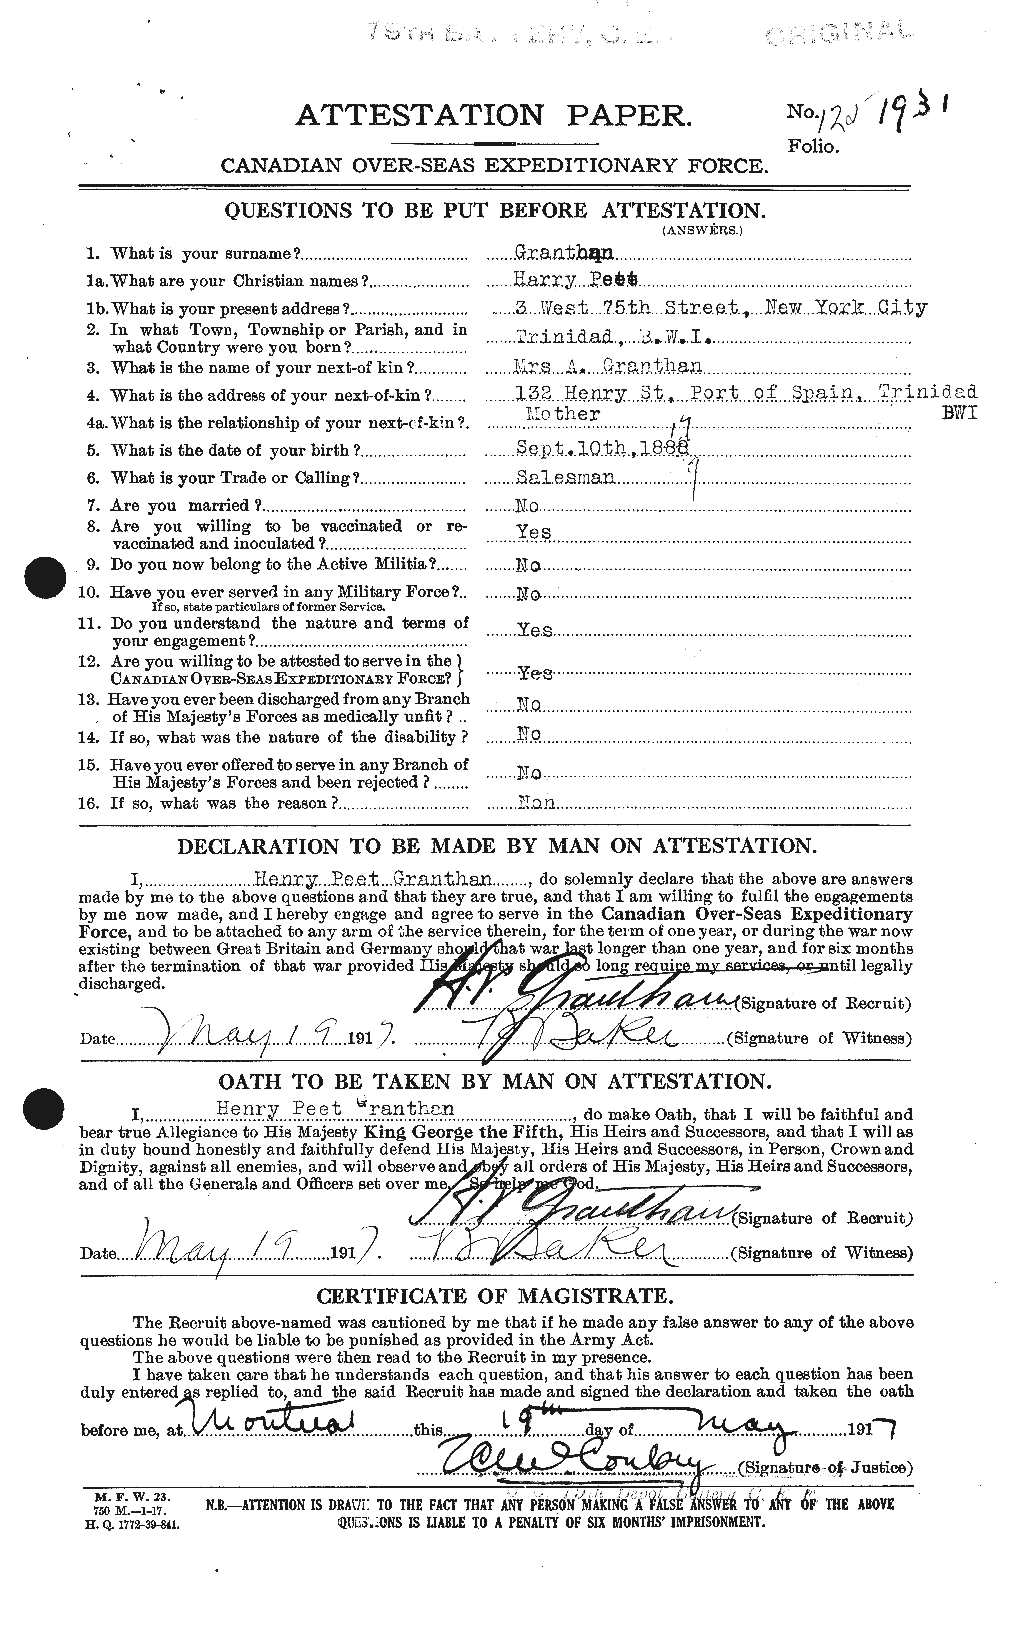 Personnel Records of the First World War - CEF 364411a